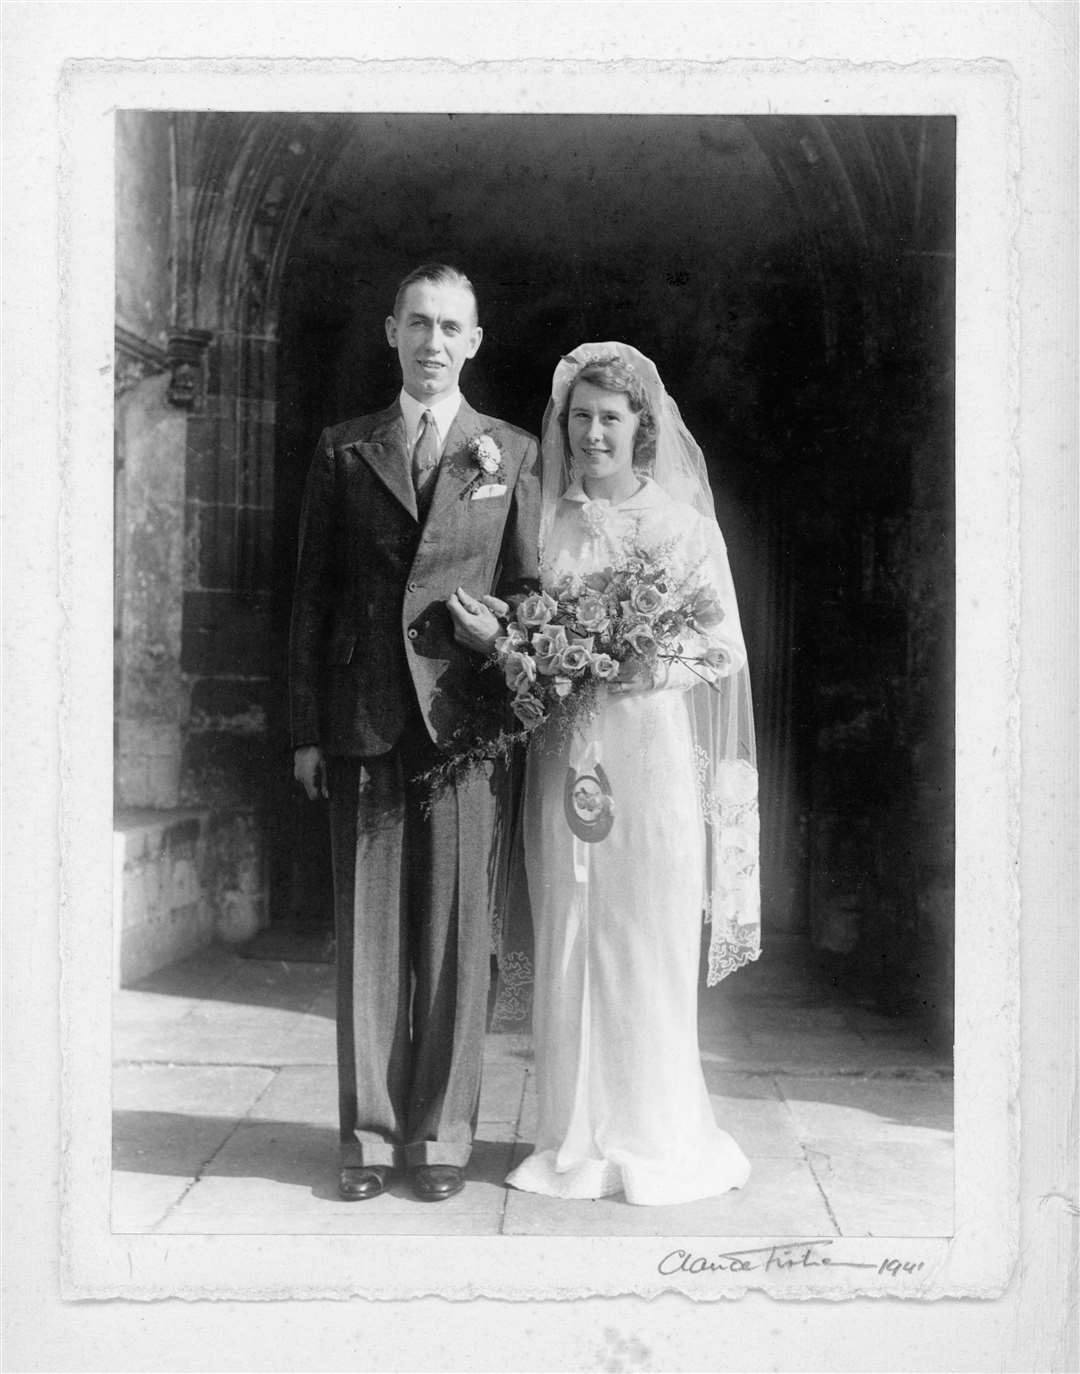 Geoffrey and Peggy Frost on their wedding day in 1941